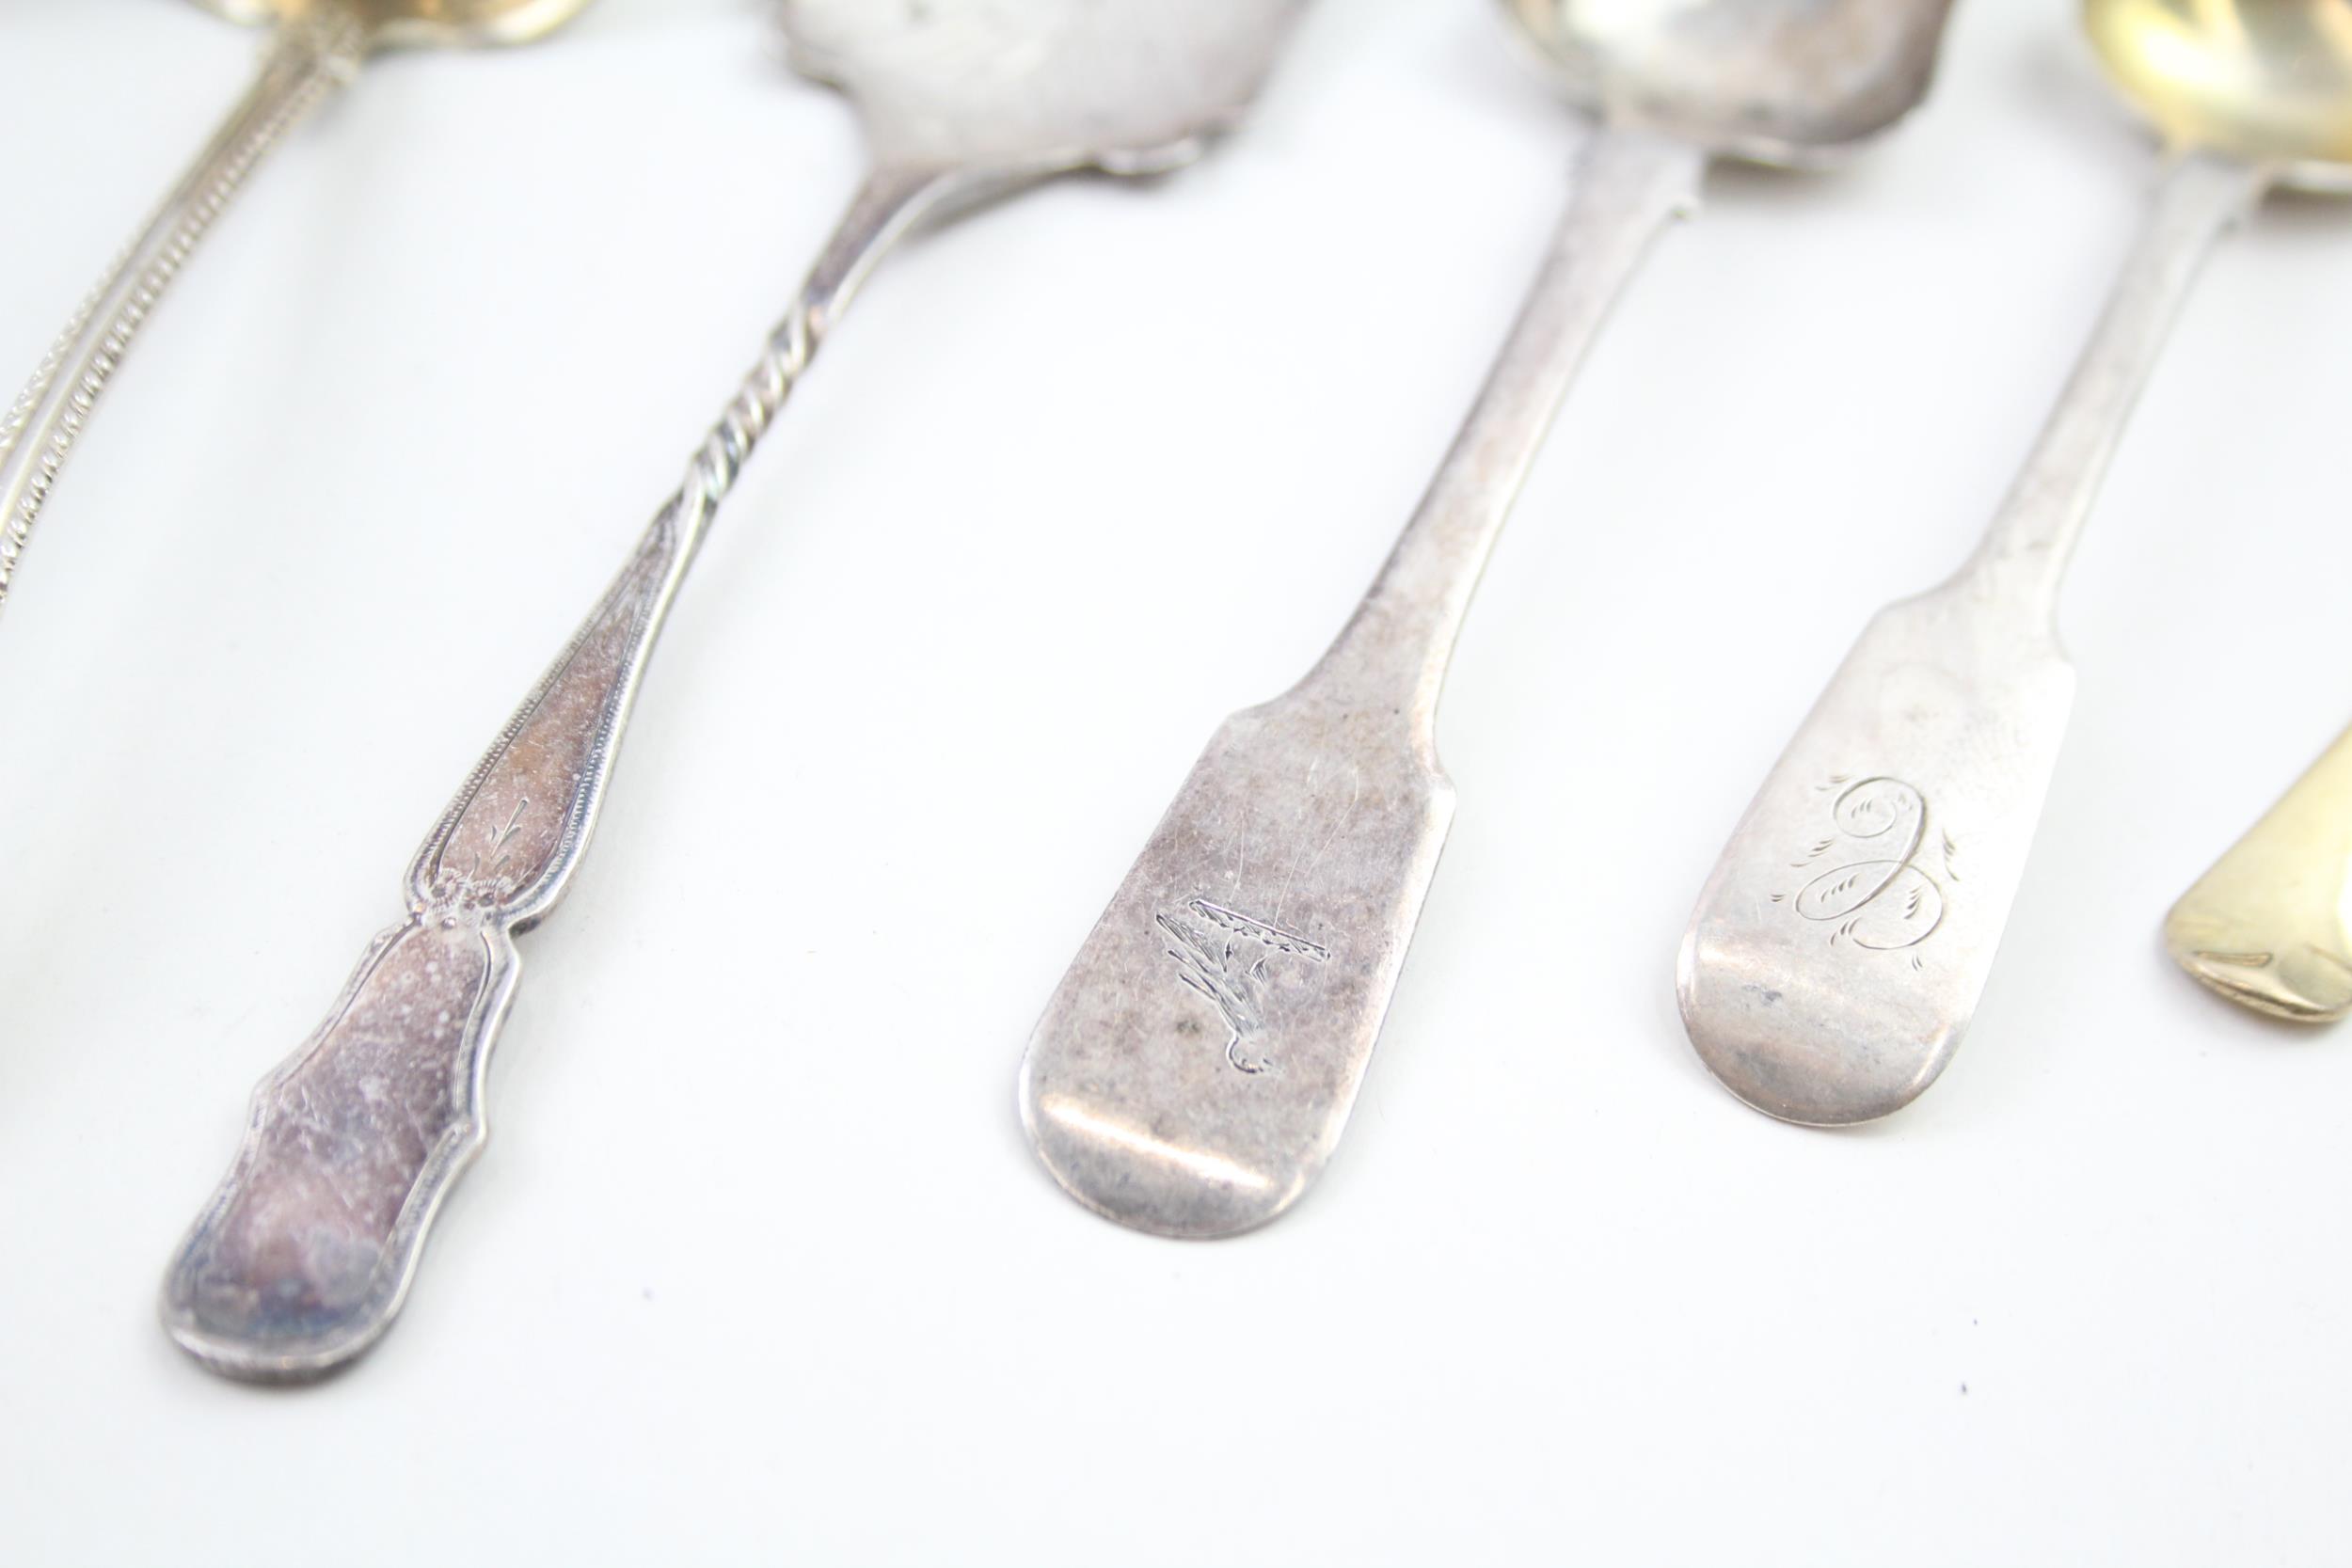 9 x Antique Vintage HM .925 Sterling Silver Spoons Inc Bottom Marked Etc (100g) - In antique / - Image 4 of 7